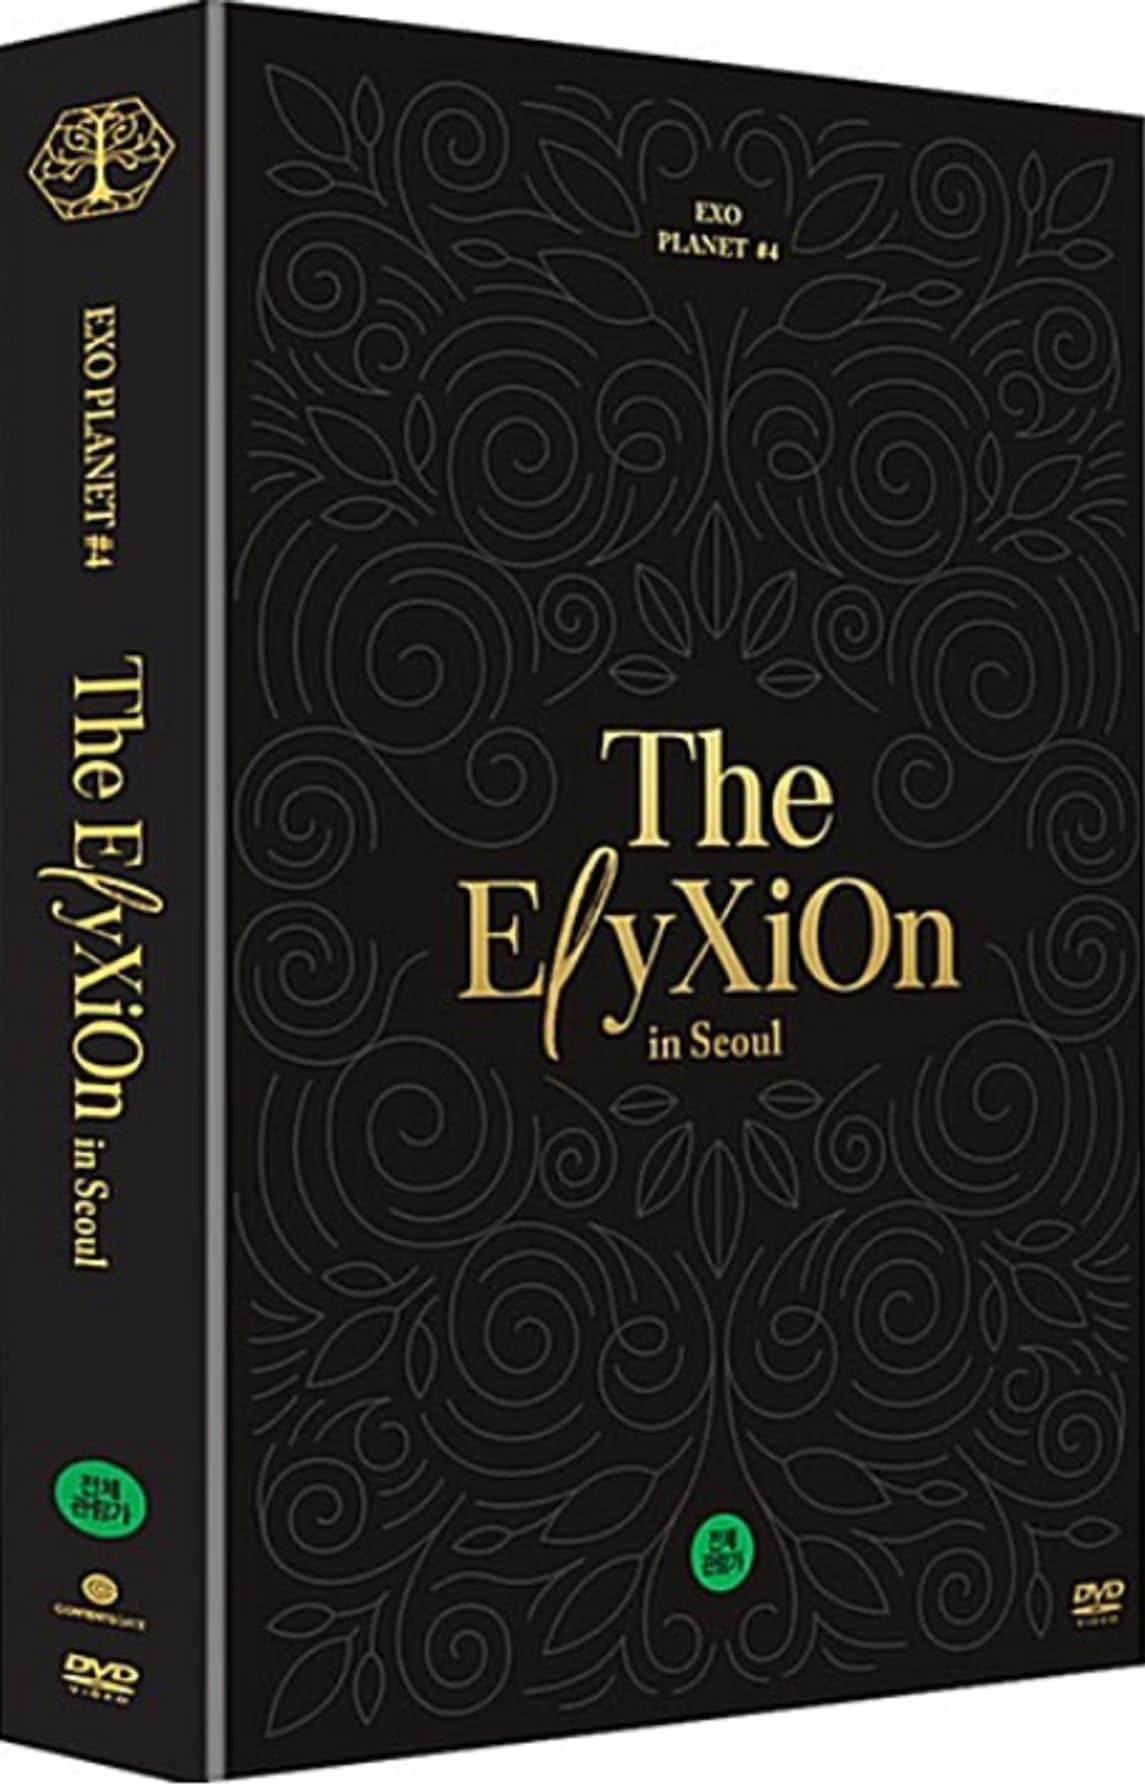 EXO PLANET＃4 The ElyXiOn in Seoul - K-POP/アジア